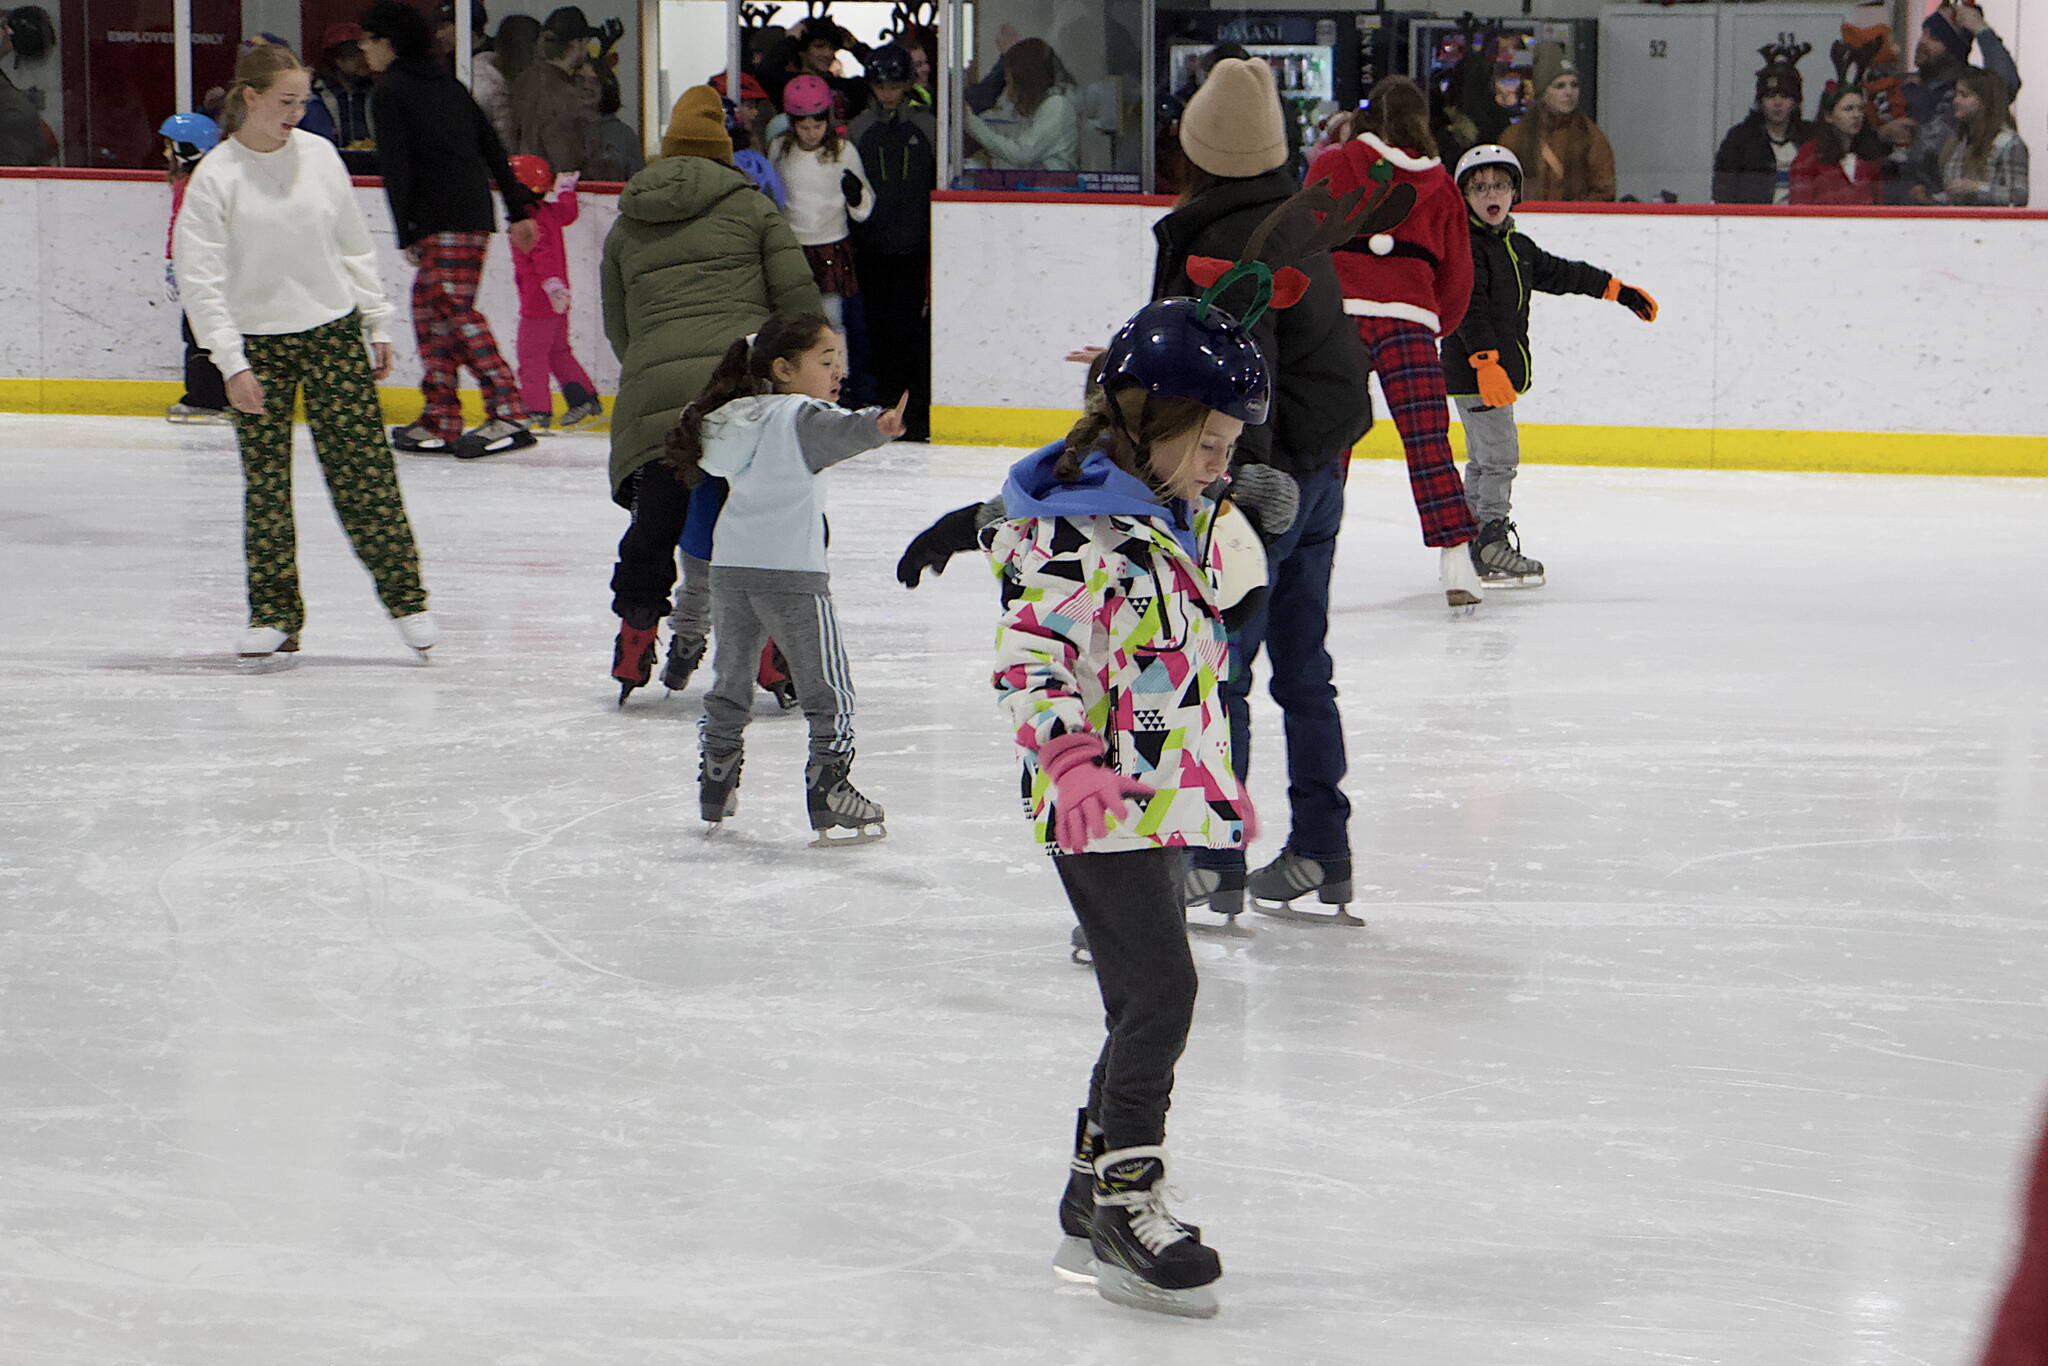 Skaters seek to find balance during the holiday season during the annual Santa Skate at Treadwell Arena on Friday night. (Mark Sabbatini / Juneau Empire)